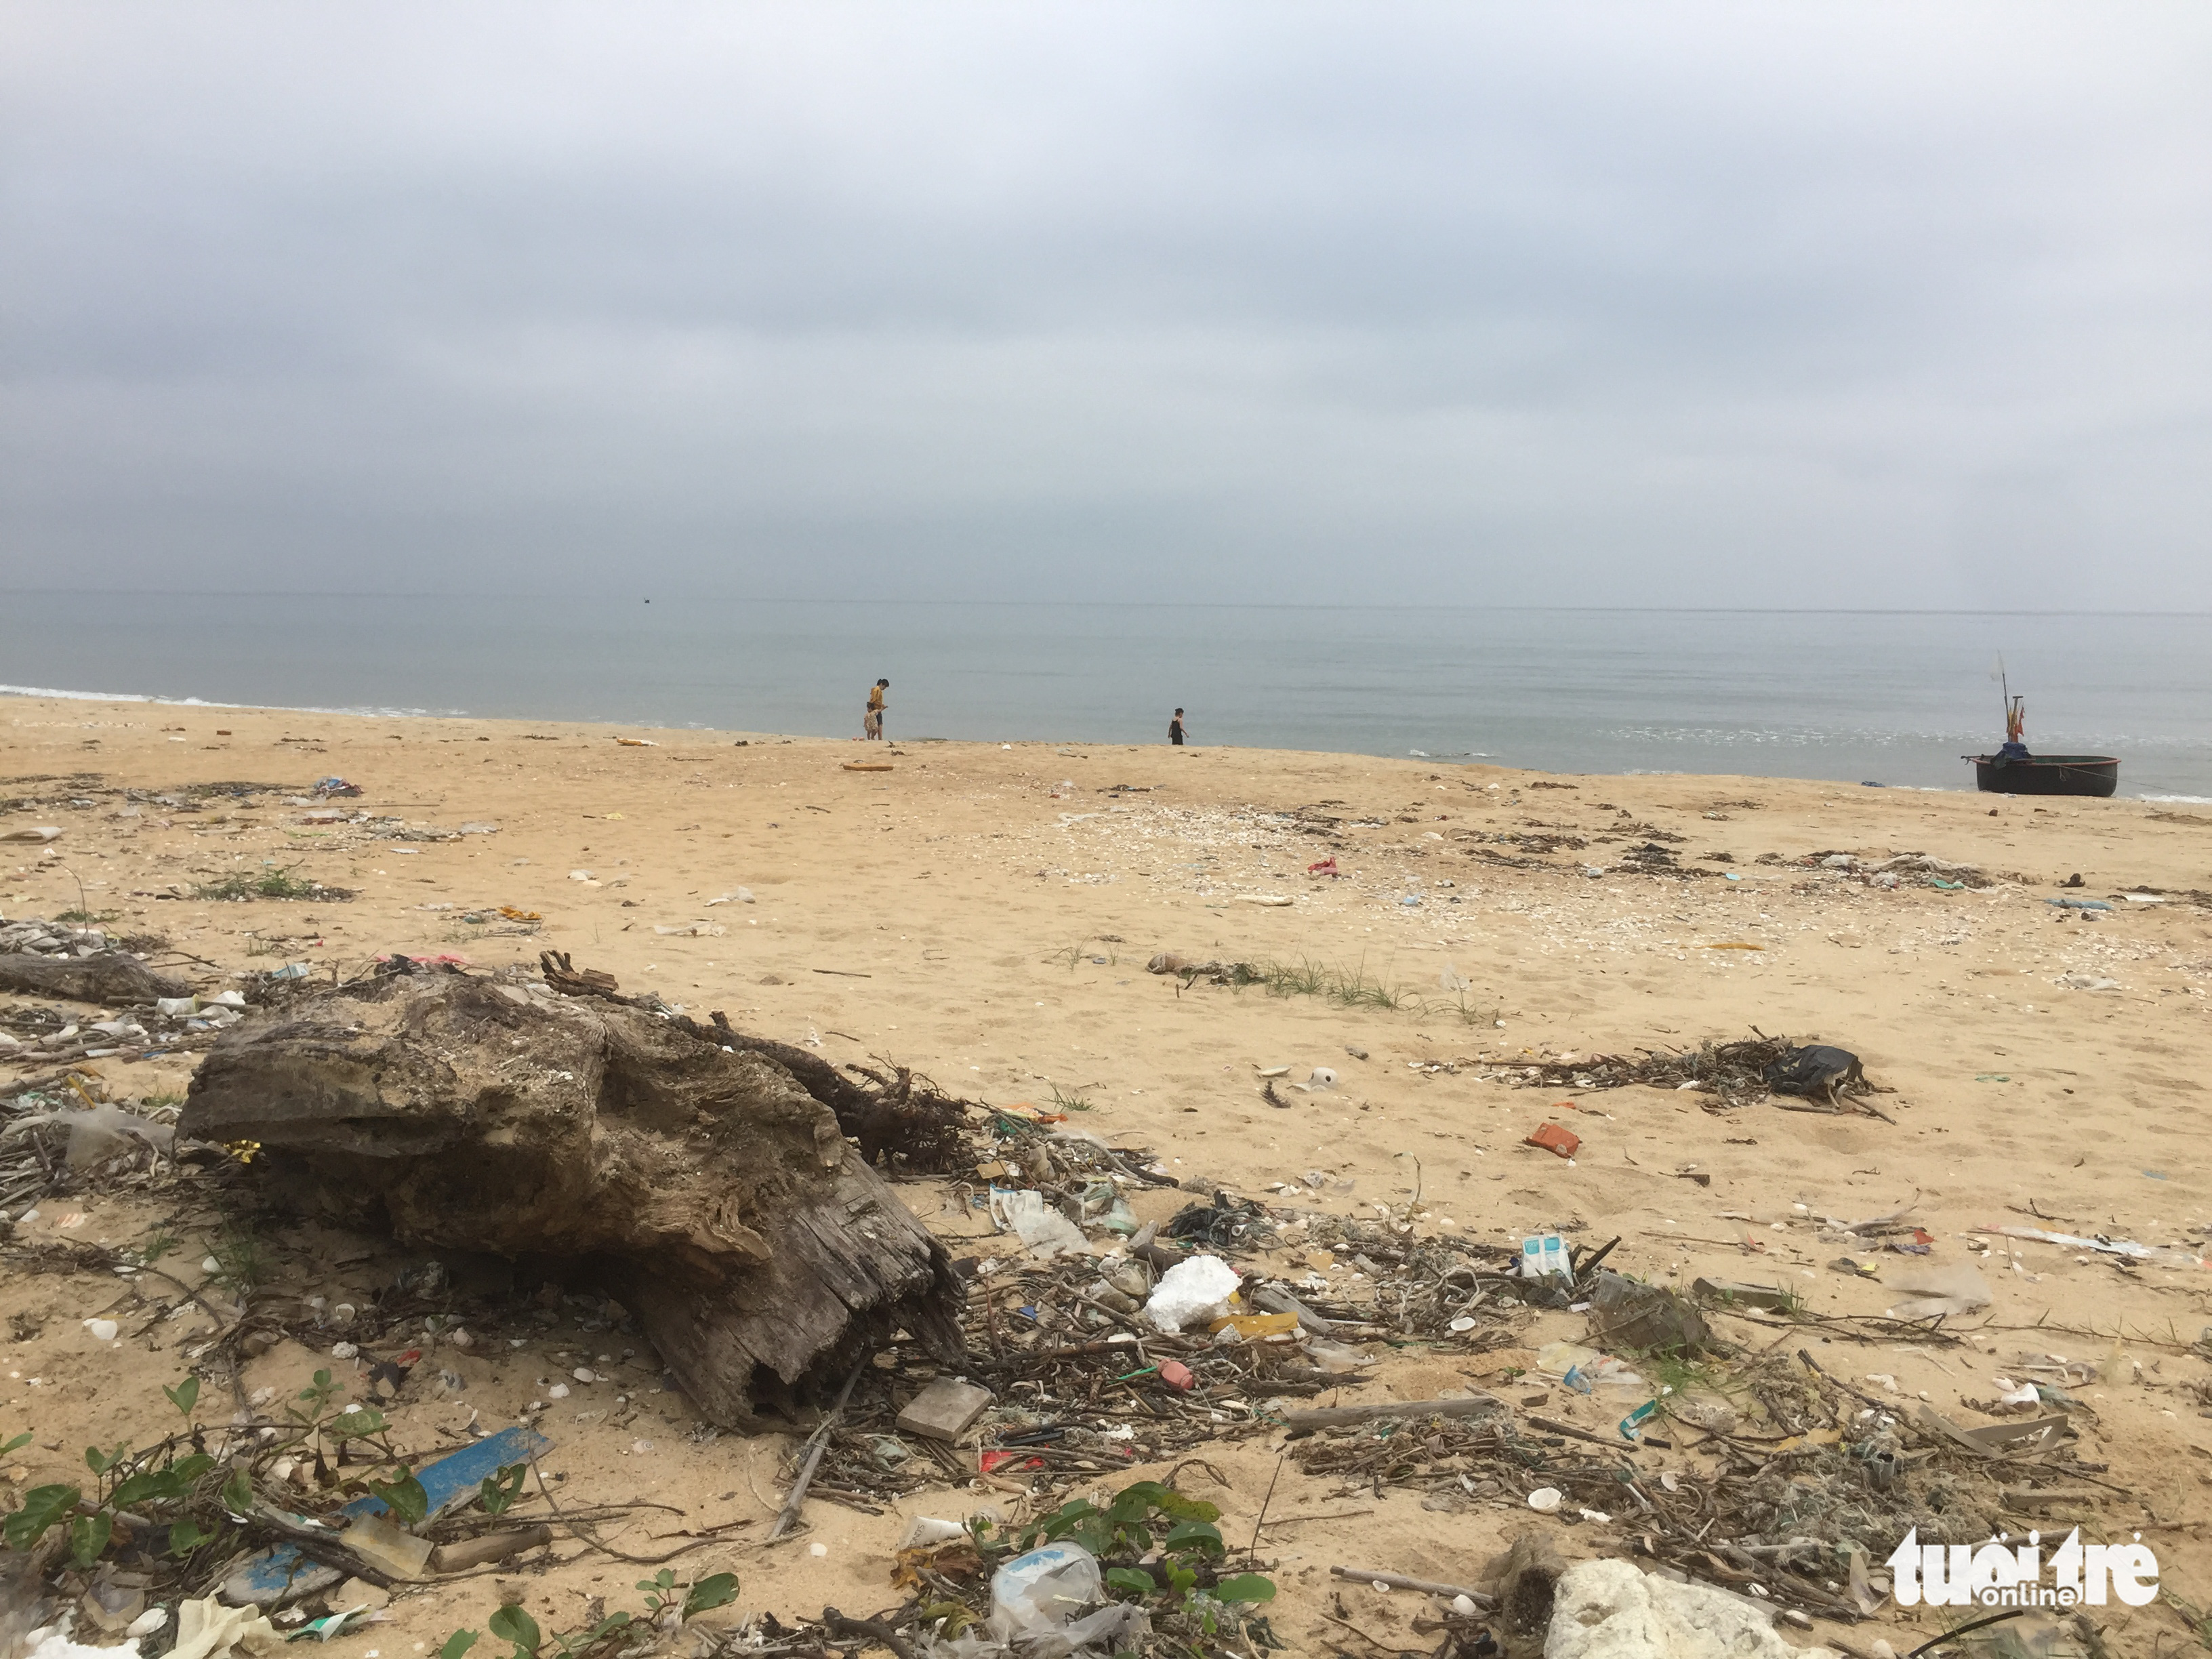 Rubbish is washed up ashore at Thien Cam Beach in Ha Tinh Province, March 19, 2022. Photo: Le Minh / Tuoi Tre